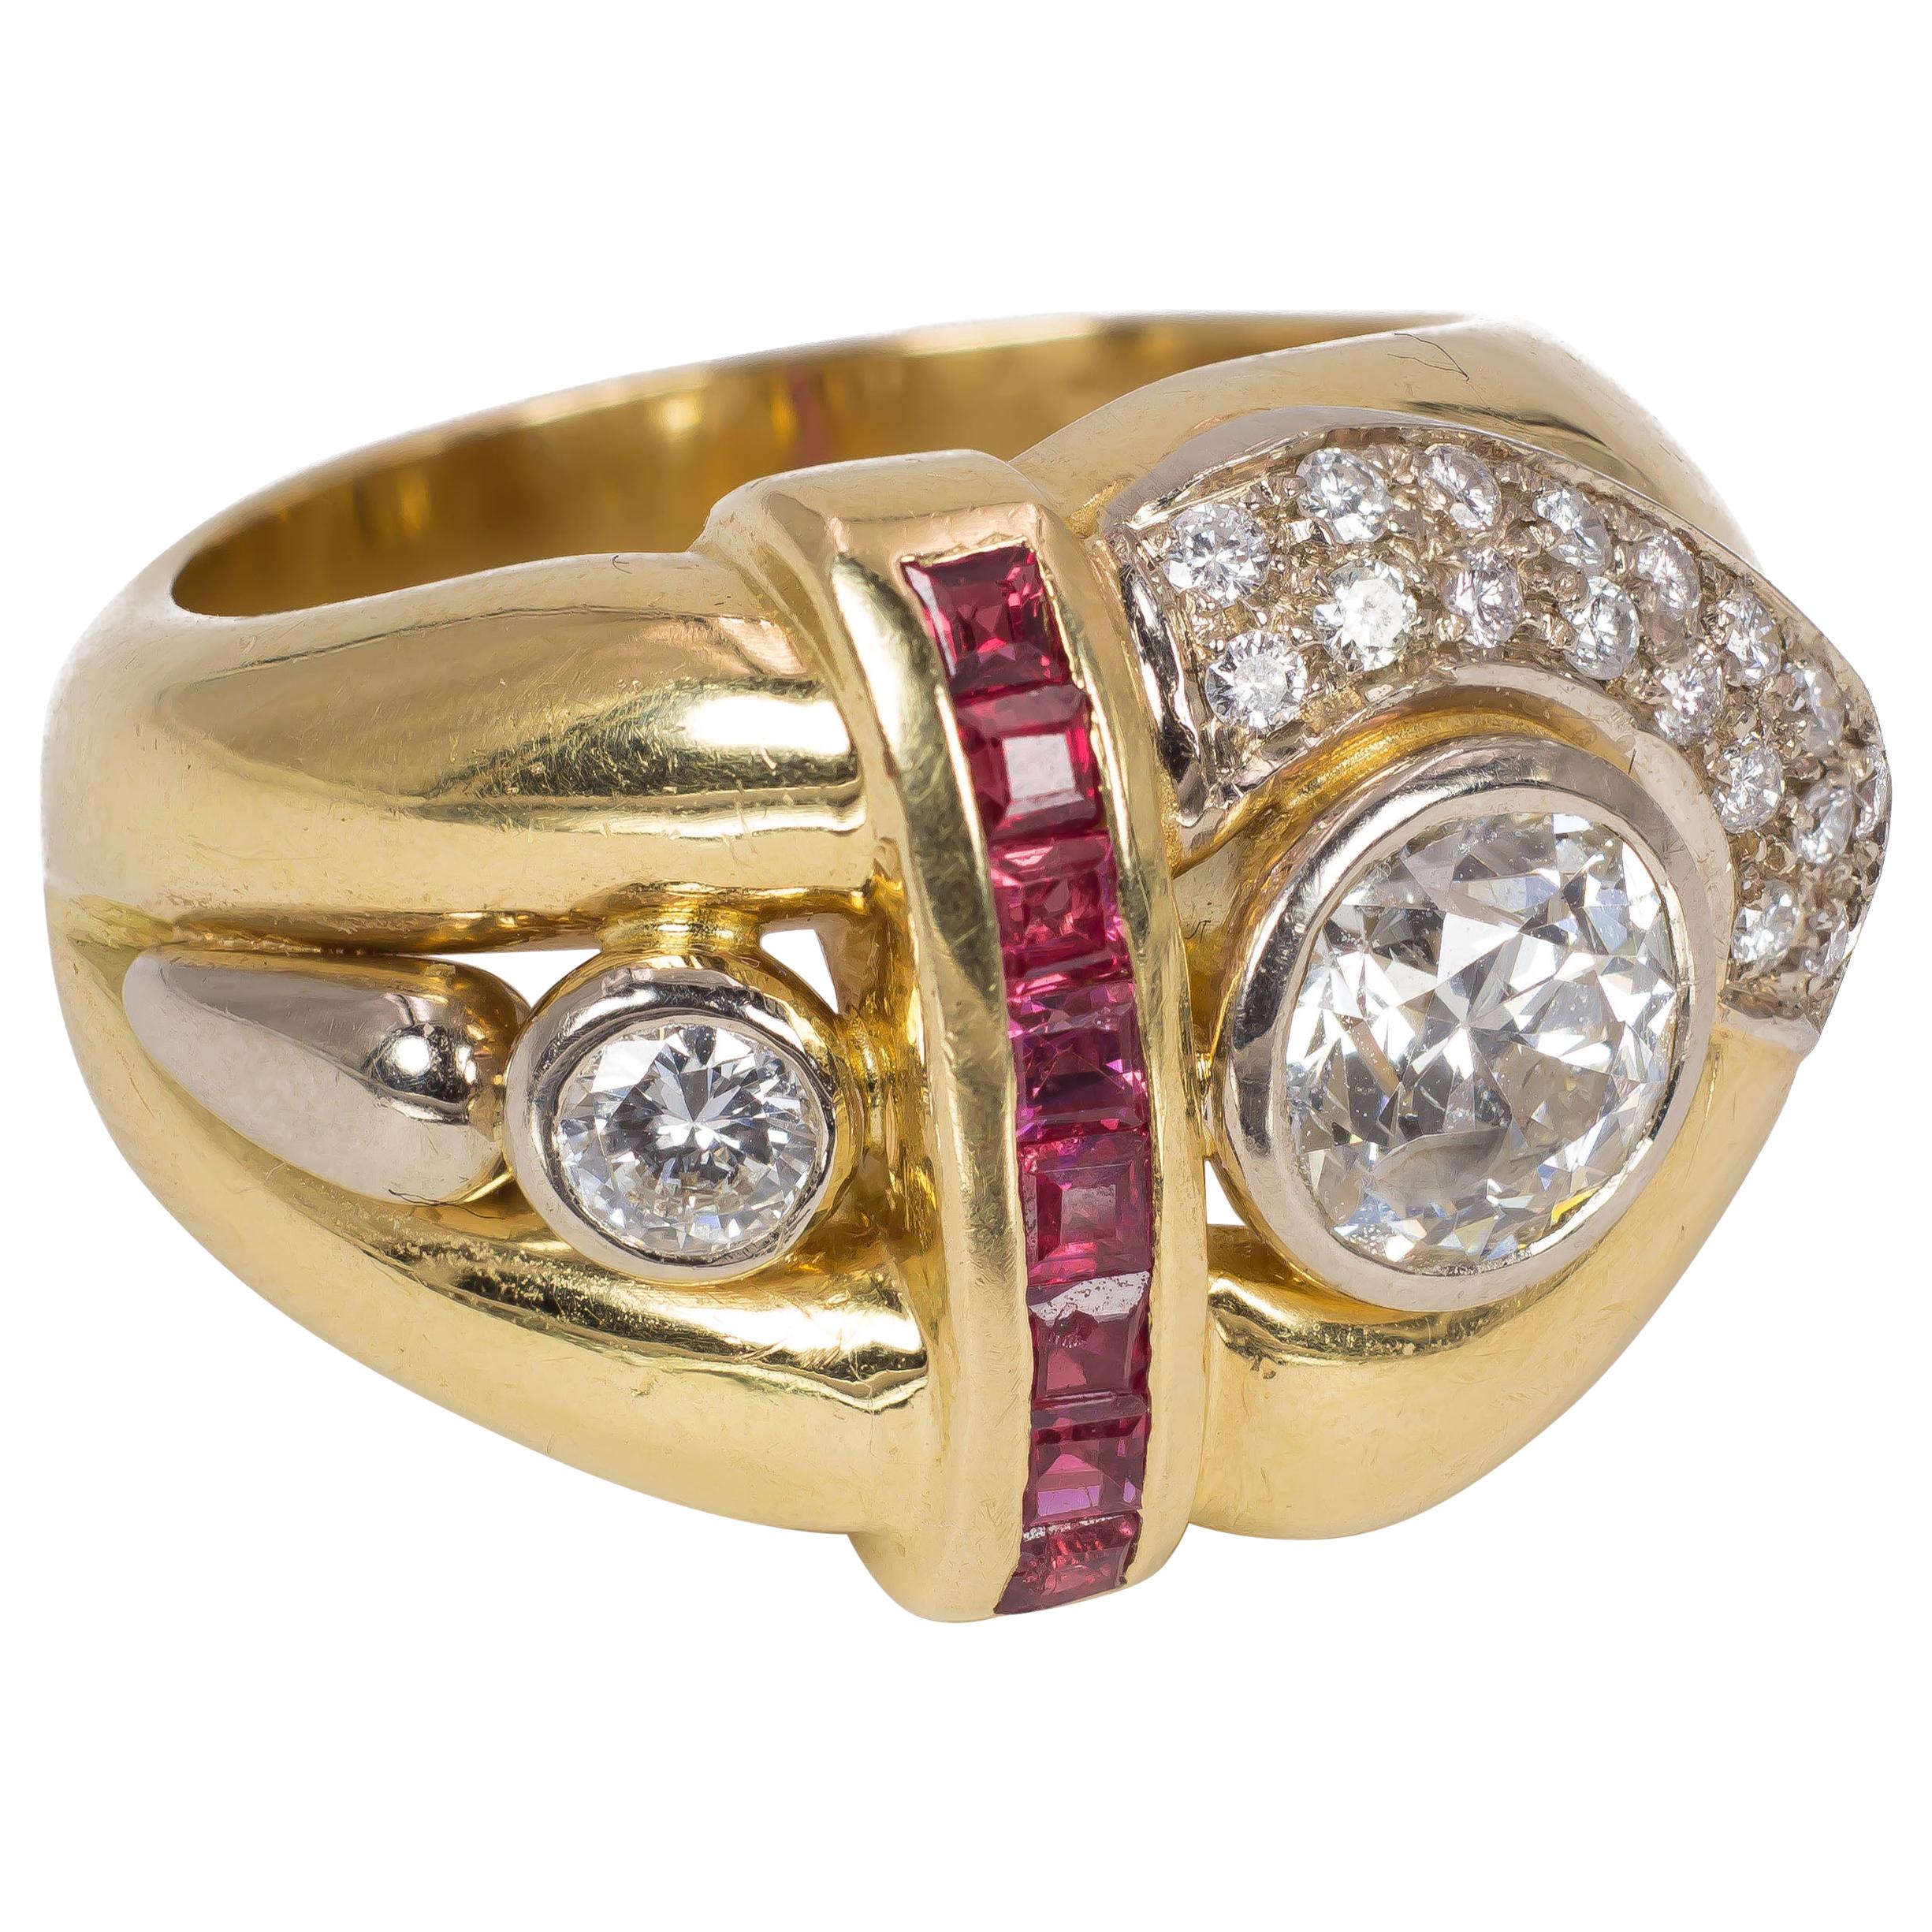 Vintage 18 Karat Gold, Diamond and Ruby Ring, 1970s For Sale